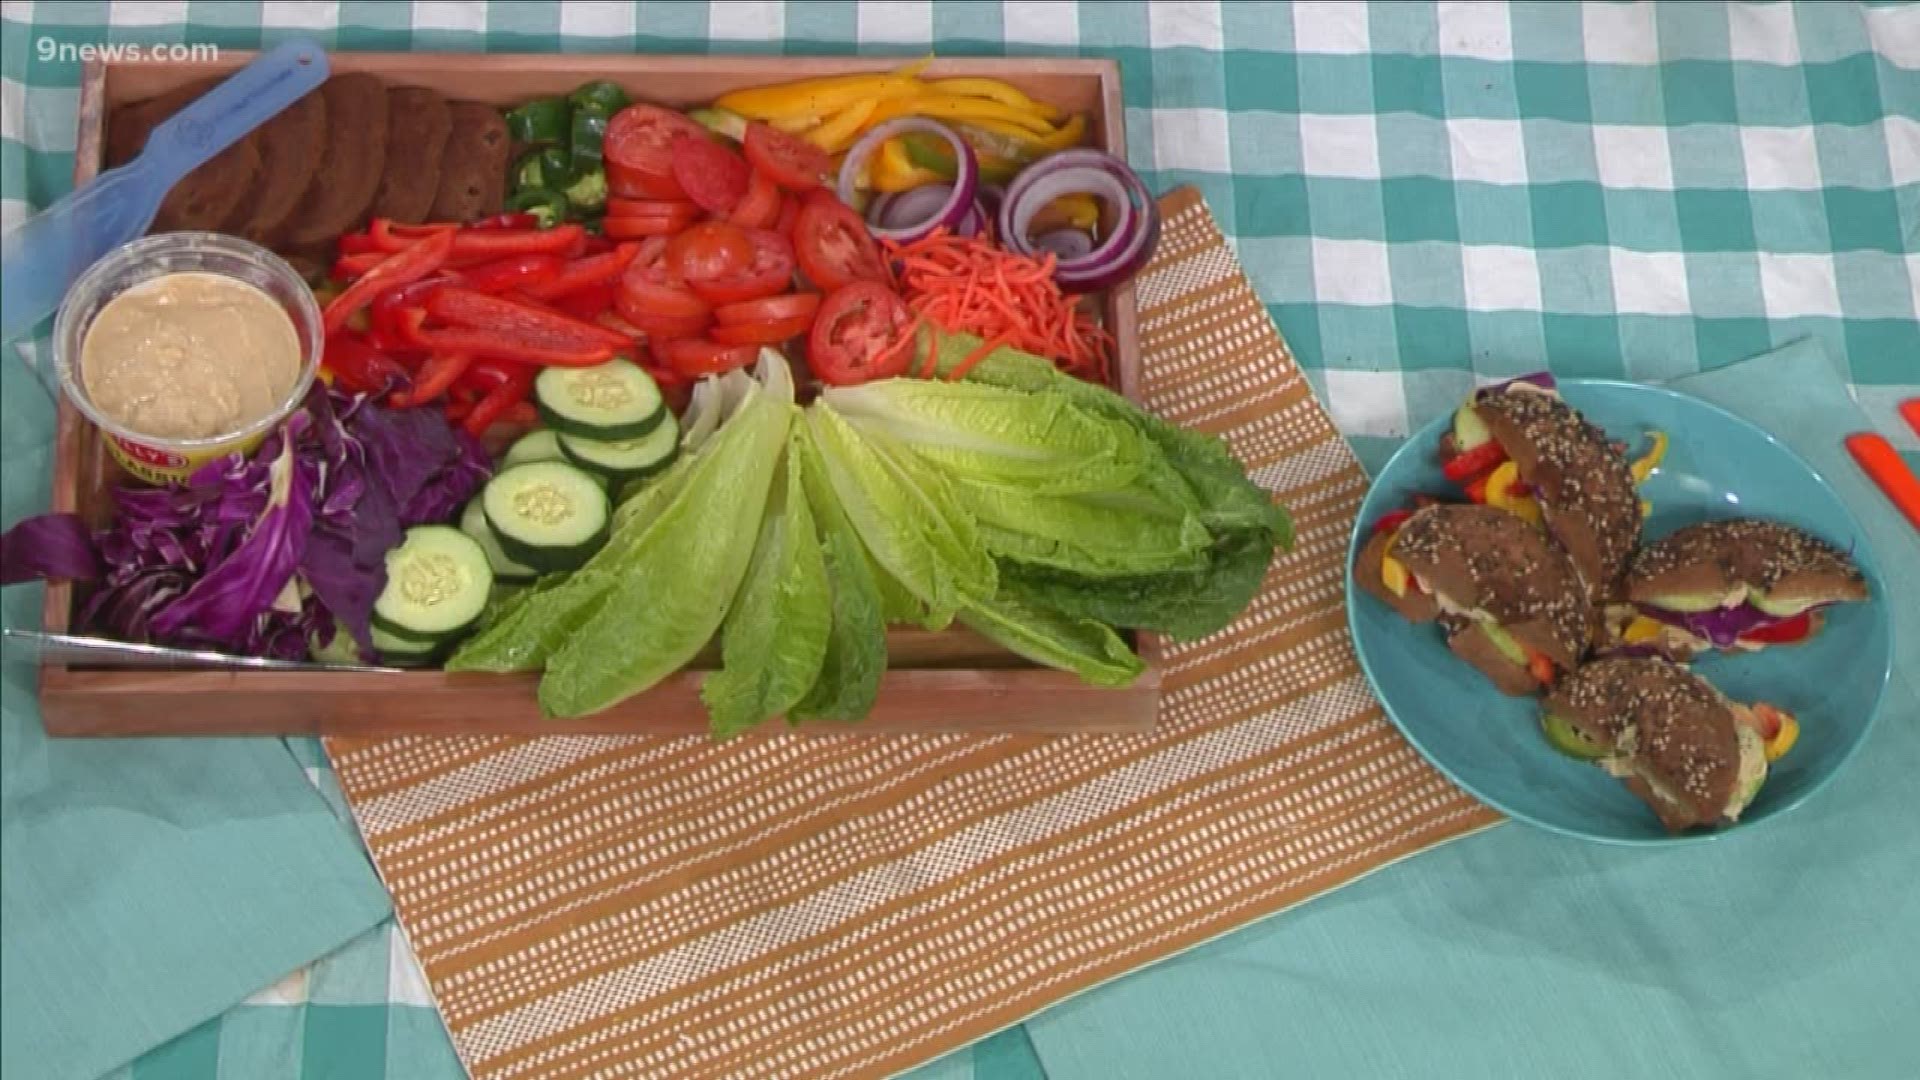 Monica Salafia from Mind on Nutrition stopped by 9NEWS to offer some alternative sandwich ideas for those kid's lunch boxes now that school is back in session.